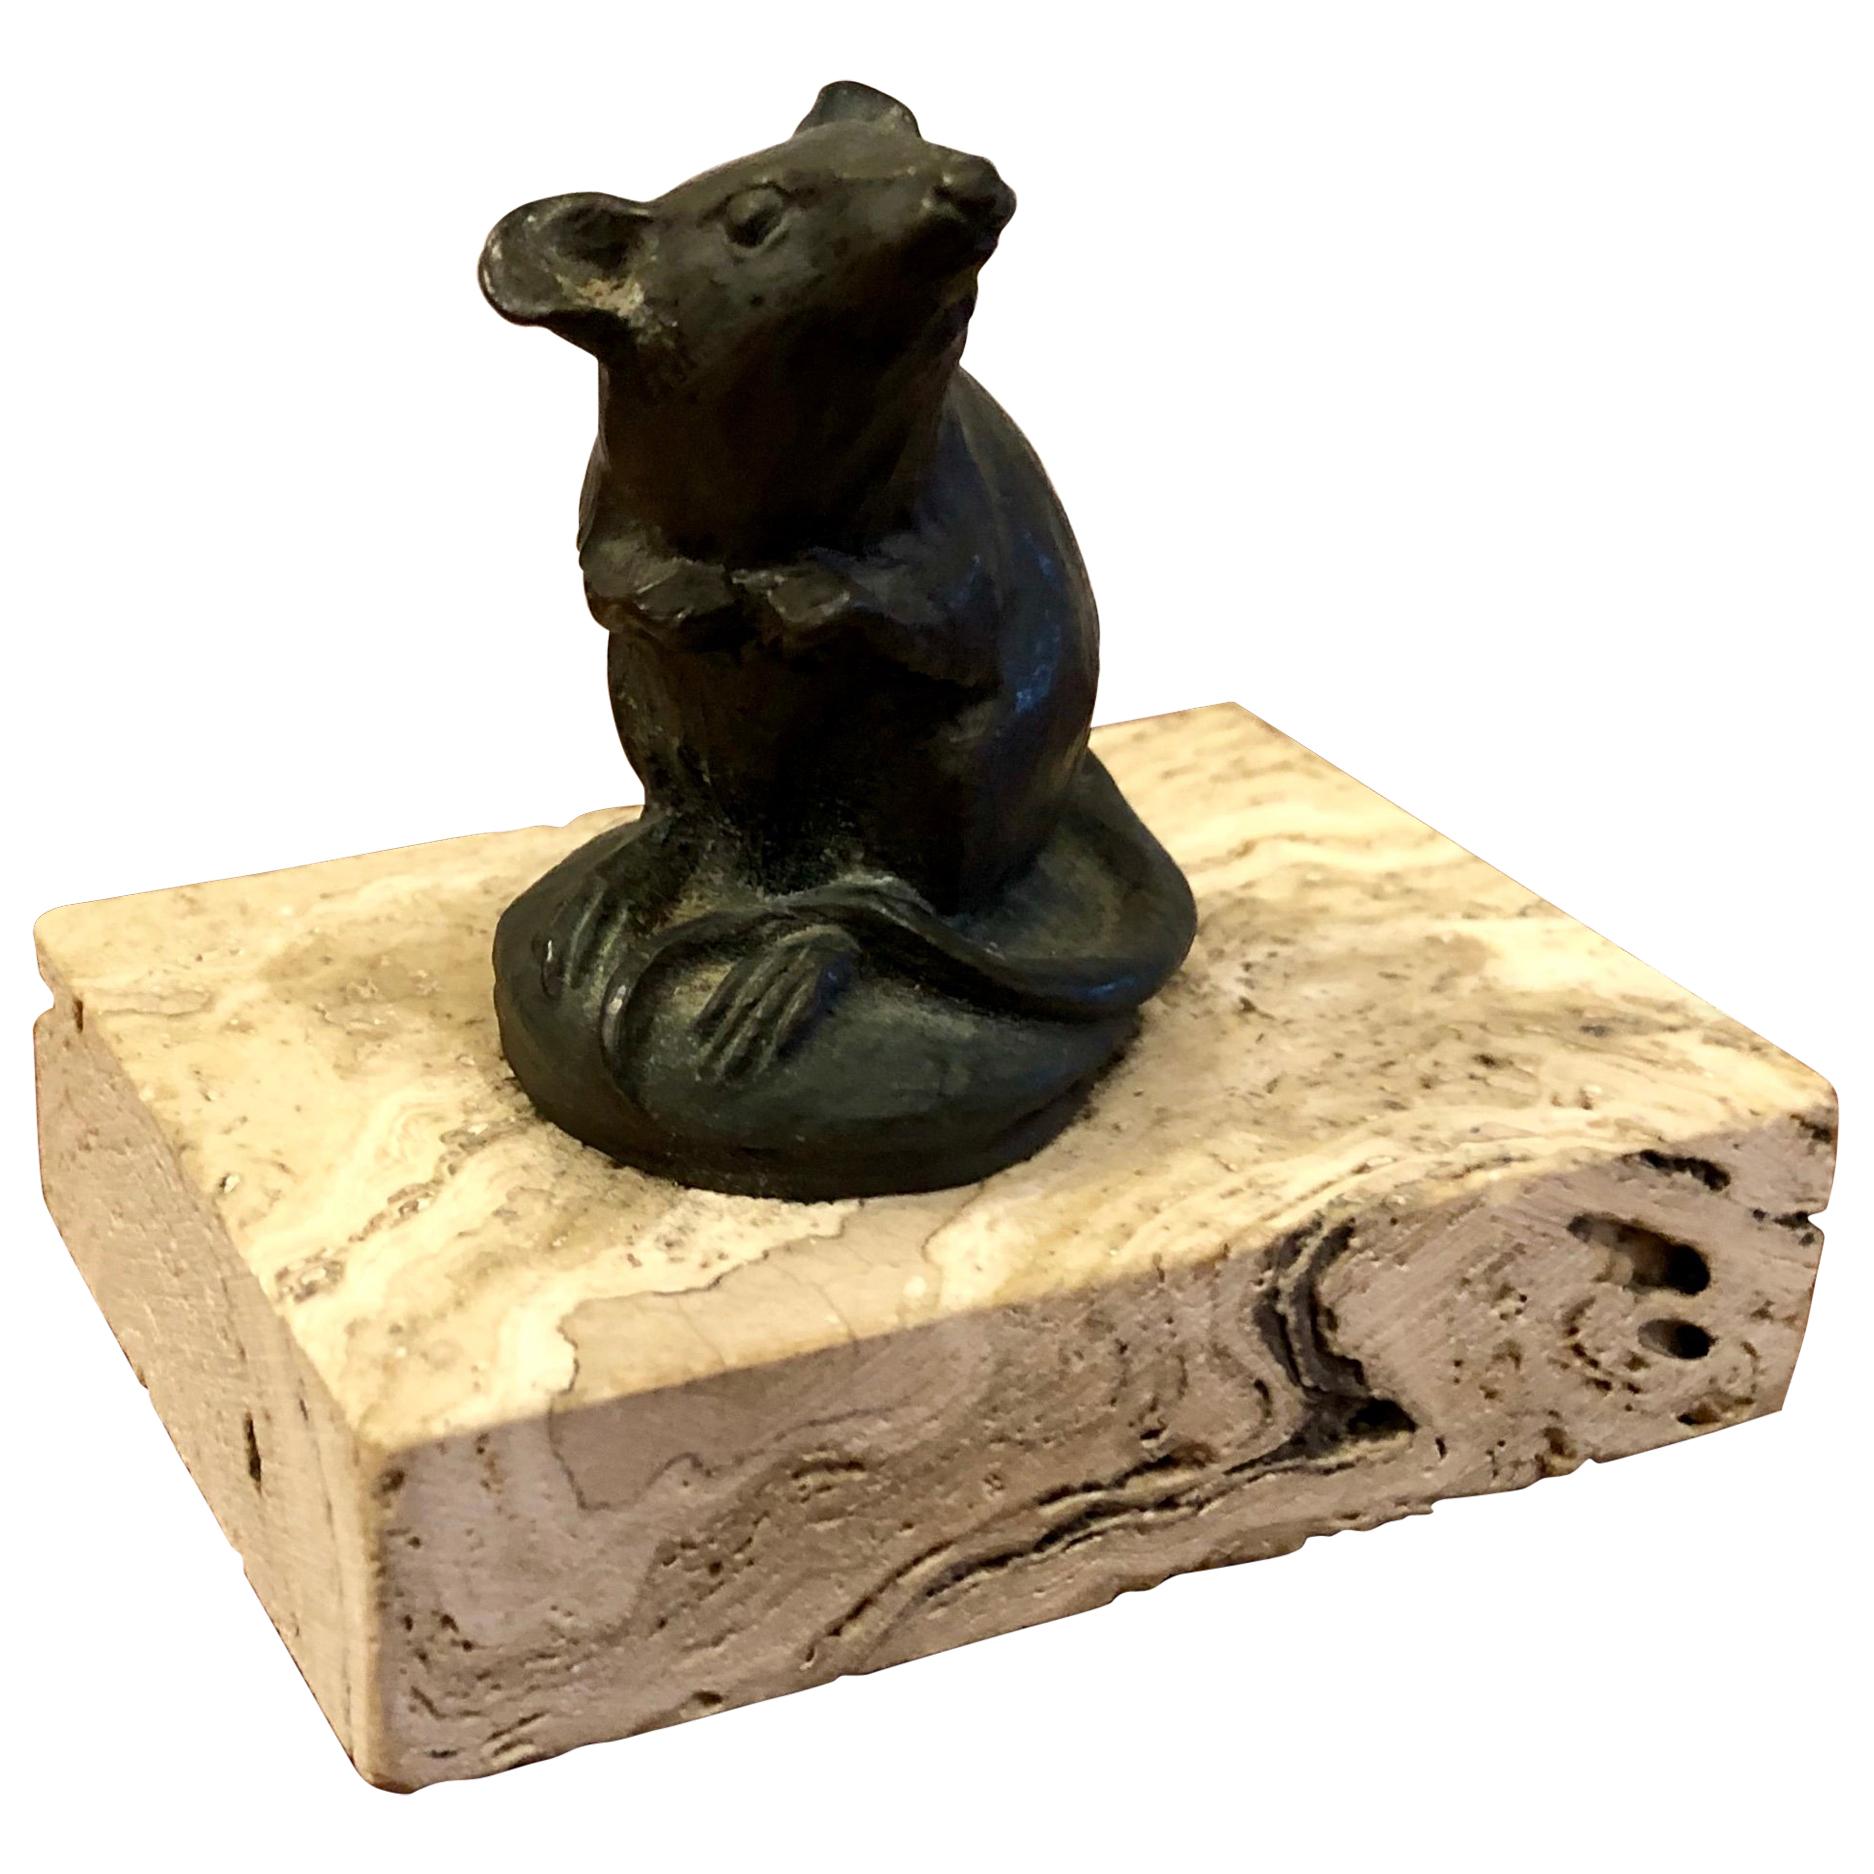 Signed and Numbered Original Bronze Mouse Sculpture by Artist Siggy Puchta